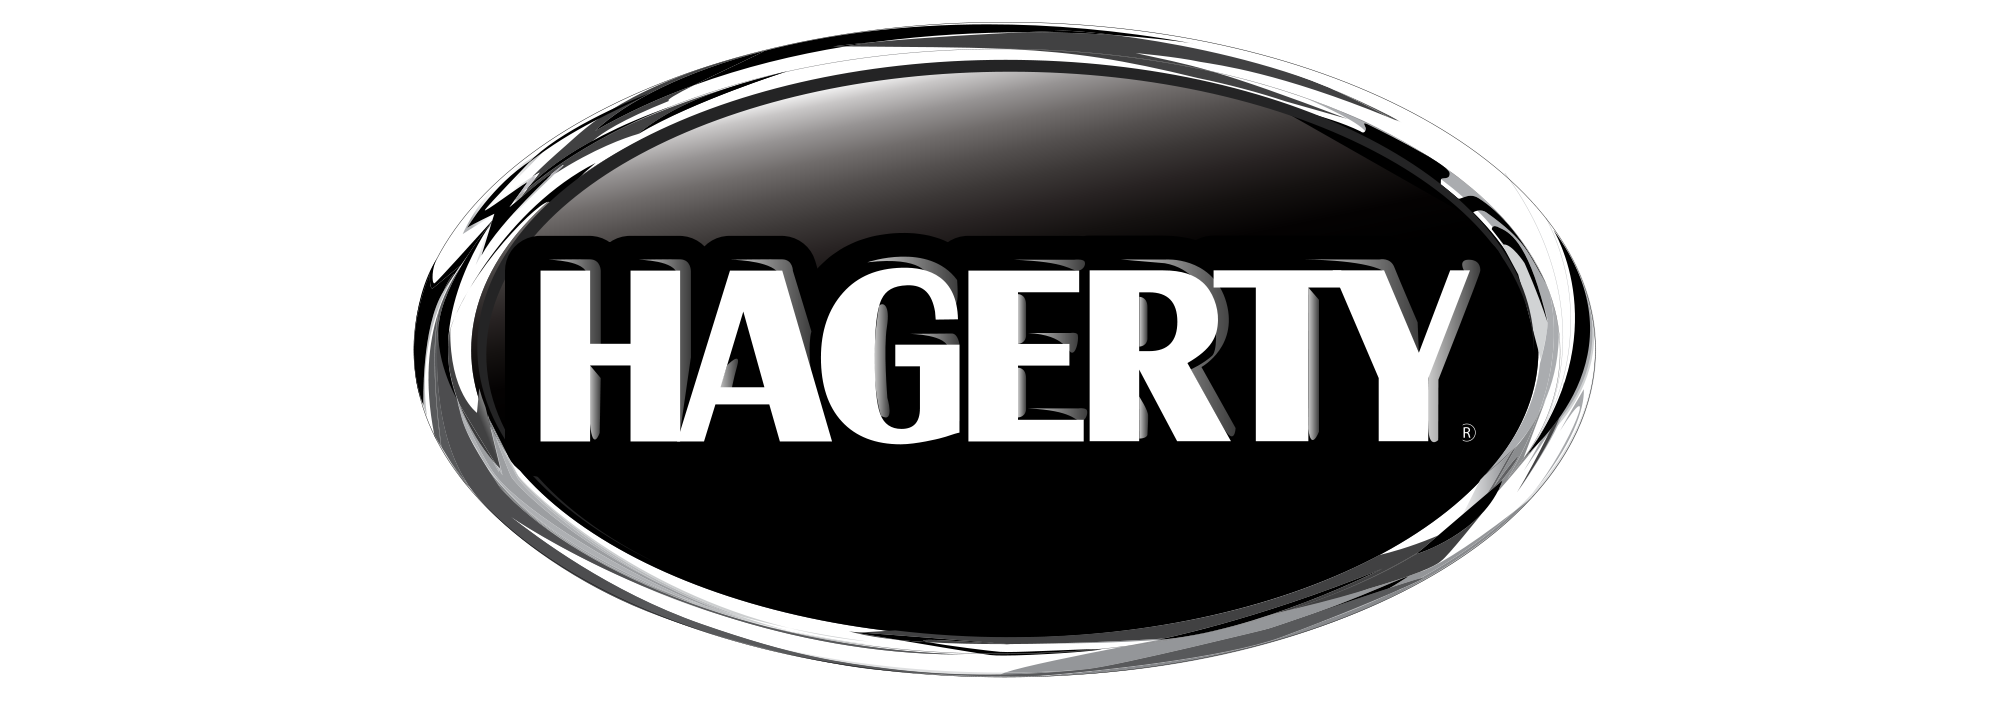 Hagerty-Classic-Car-Insurance.png